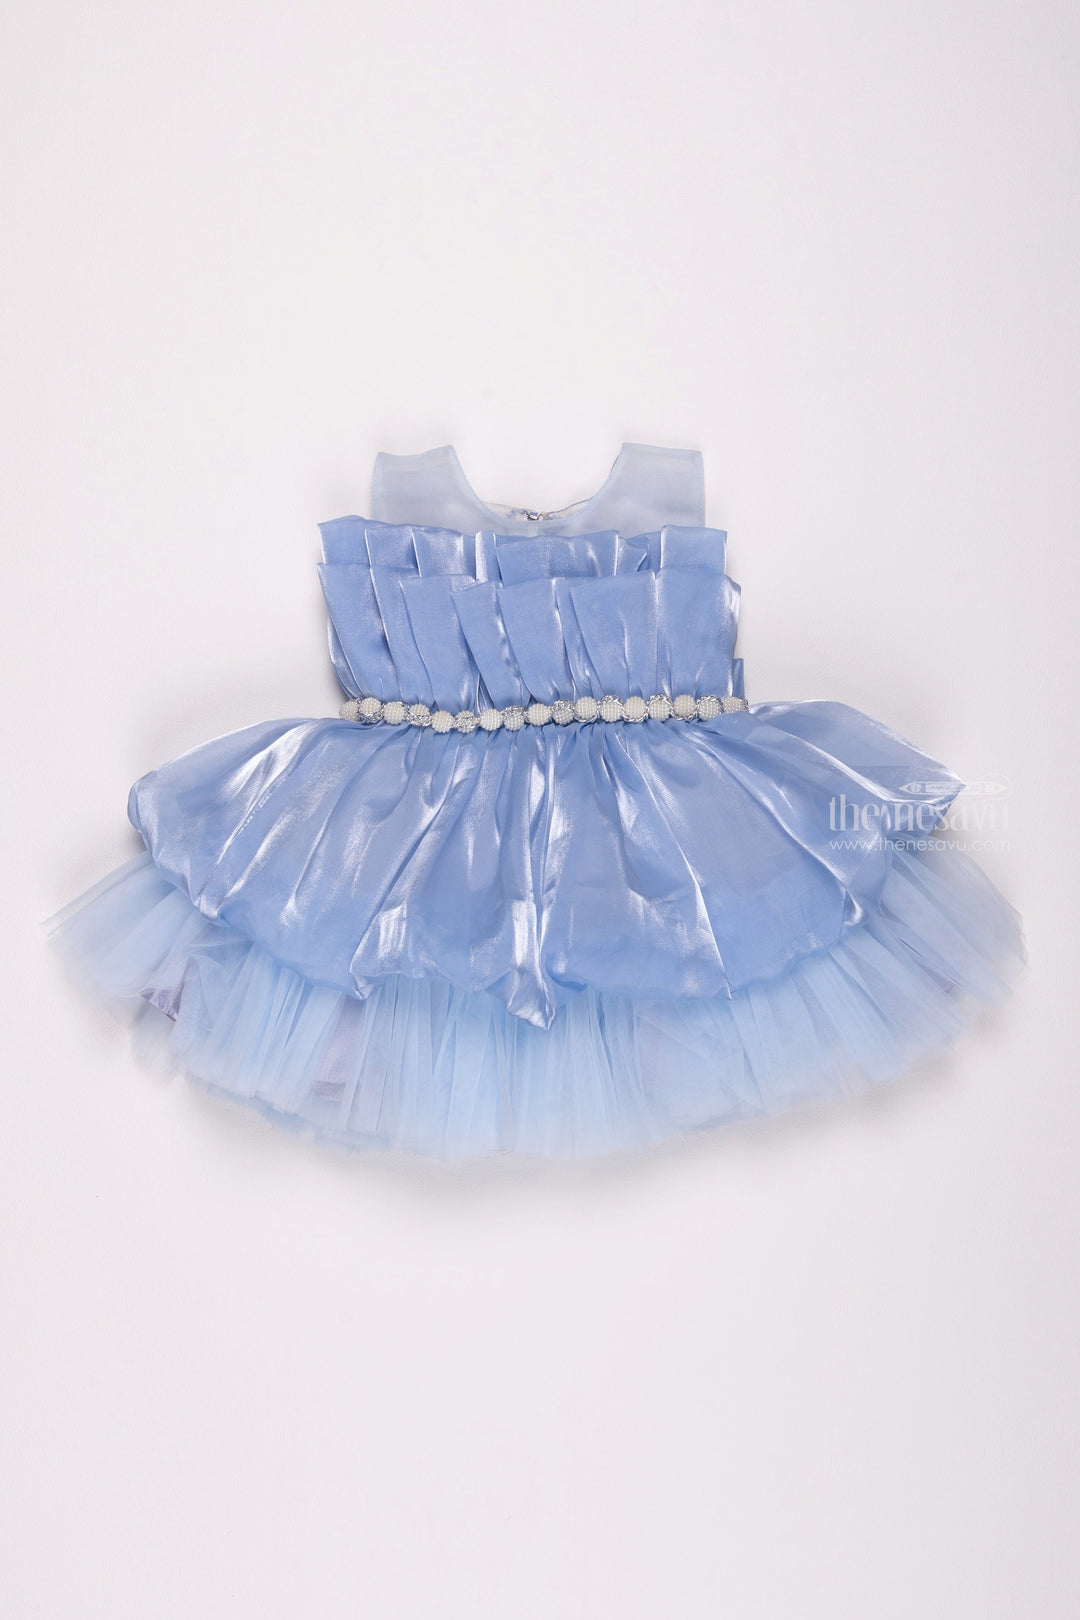 The Nesavu Girls Fancy Party Frock Azure Whimsy: Double-Layered Pleated Baby Party Frock for Girls Nesavu 12 (3M) / Blue / Organza PF143A-12 Find the Perfect Baby Birthday Frock: Trendy Dresses for Little Princesses | The Nesavu